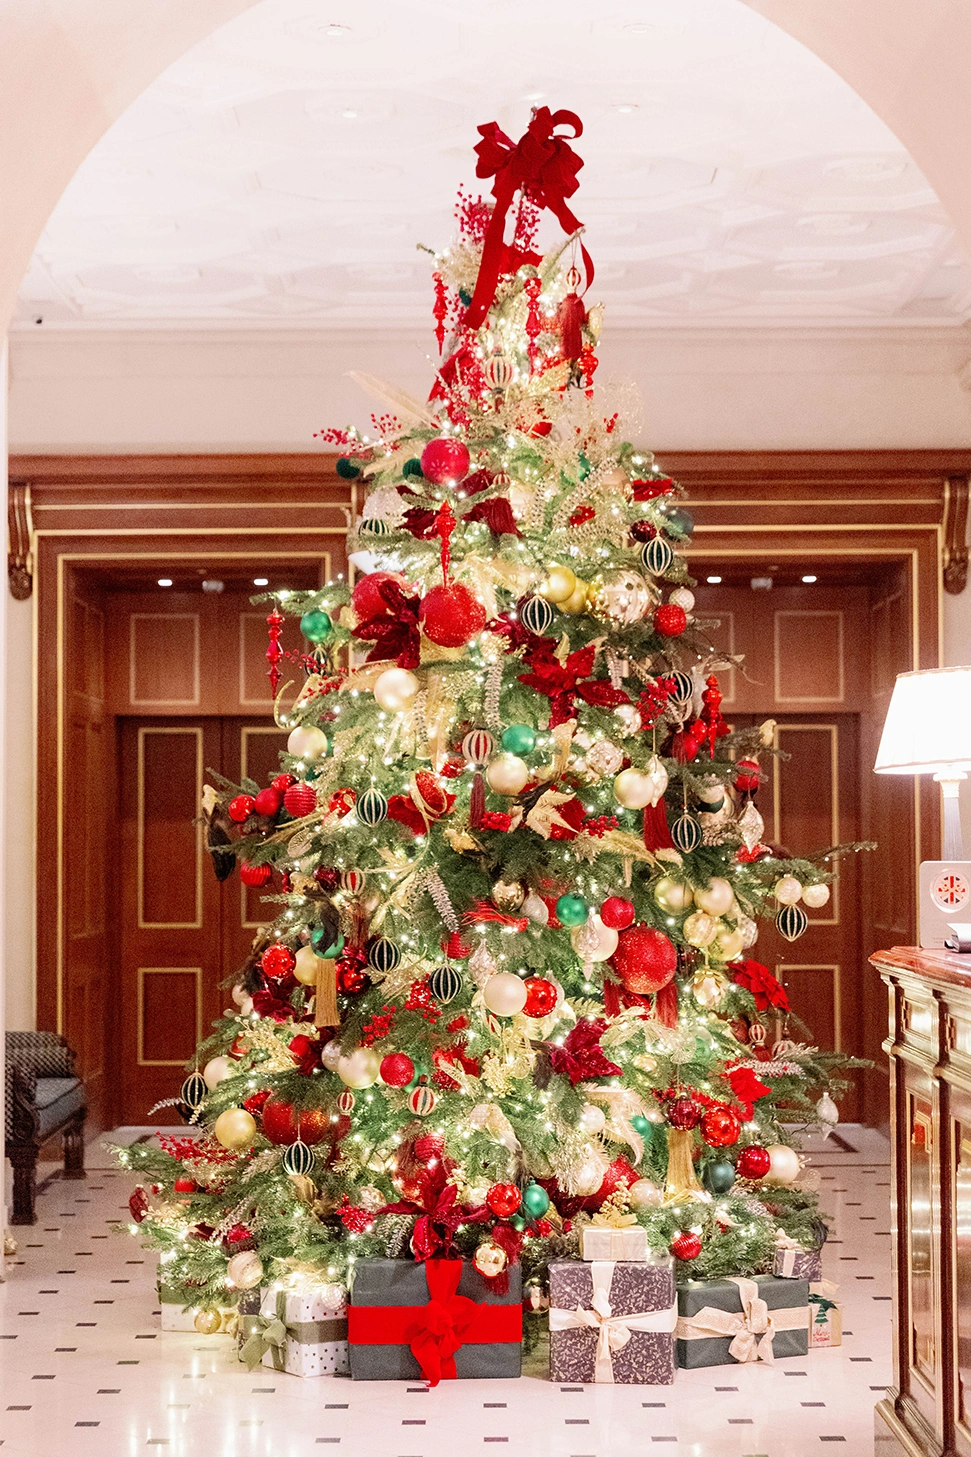 The Most Spectacular Christmas Trees In London To Visit